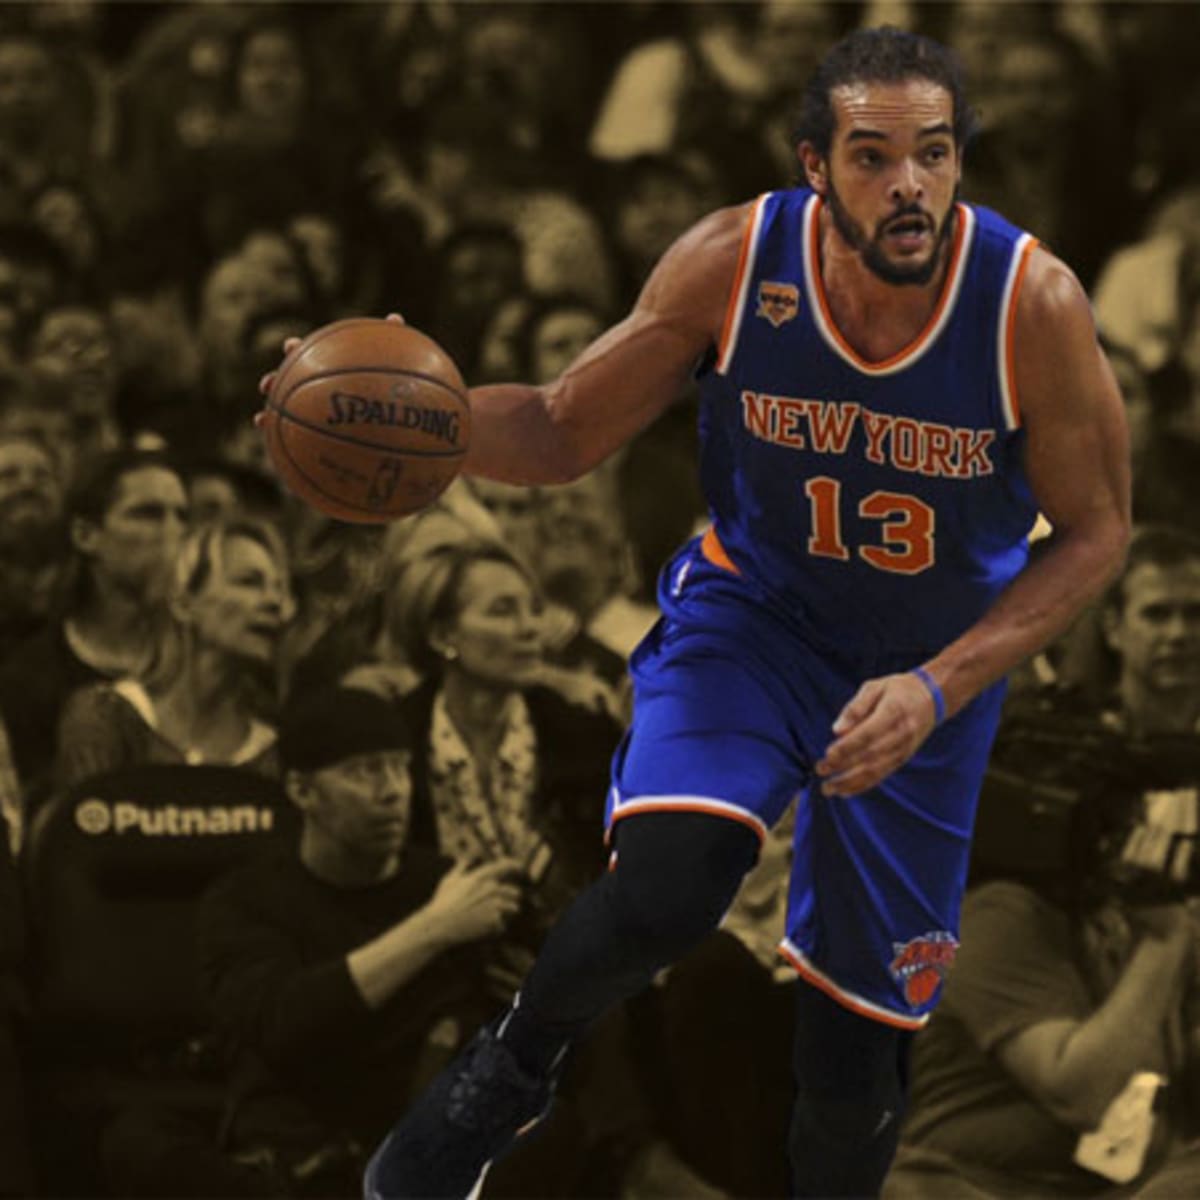 No shortcuts: All-Star Joakim Noah's passion leads to success on